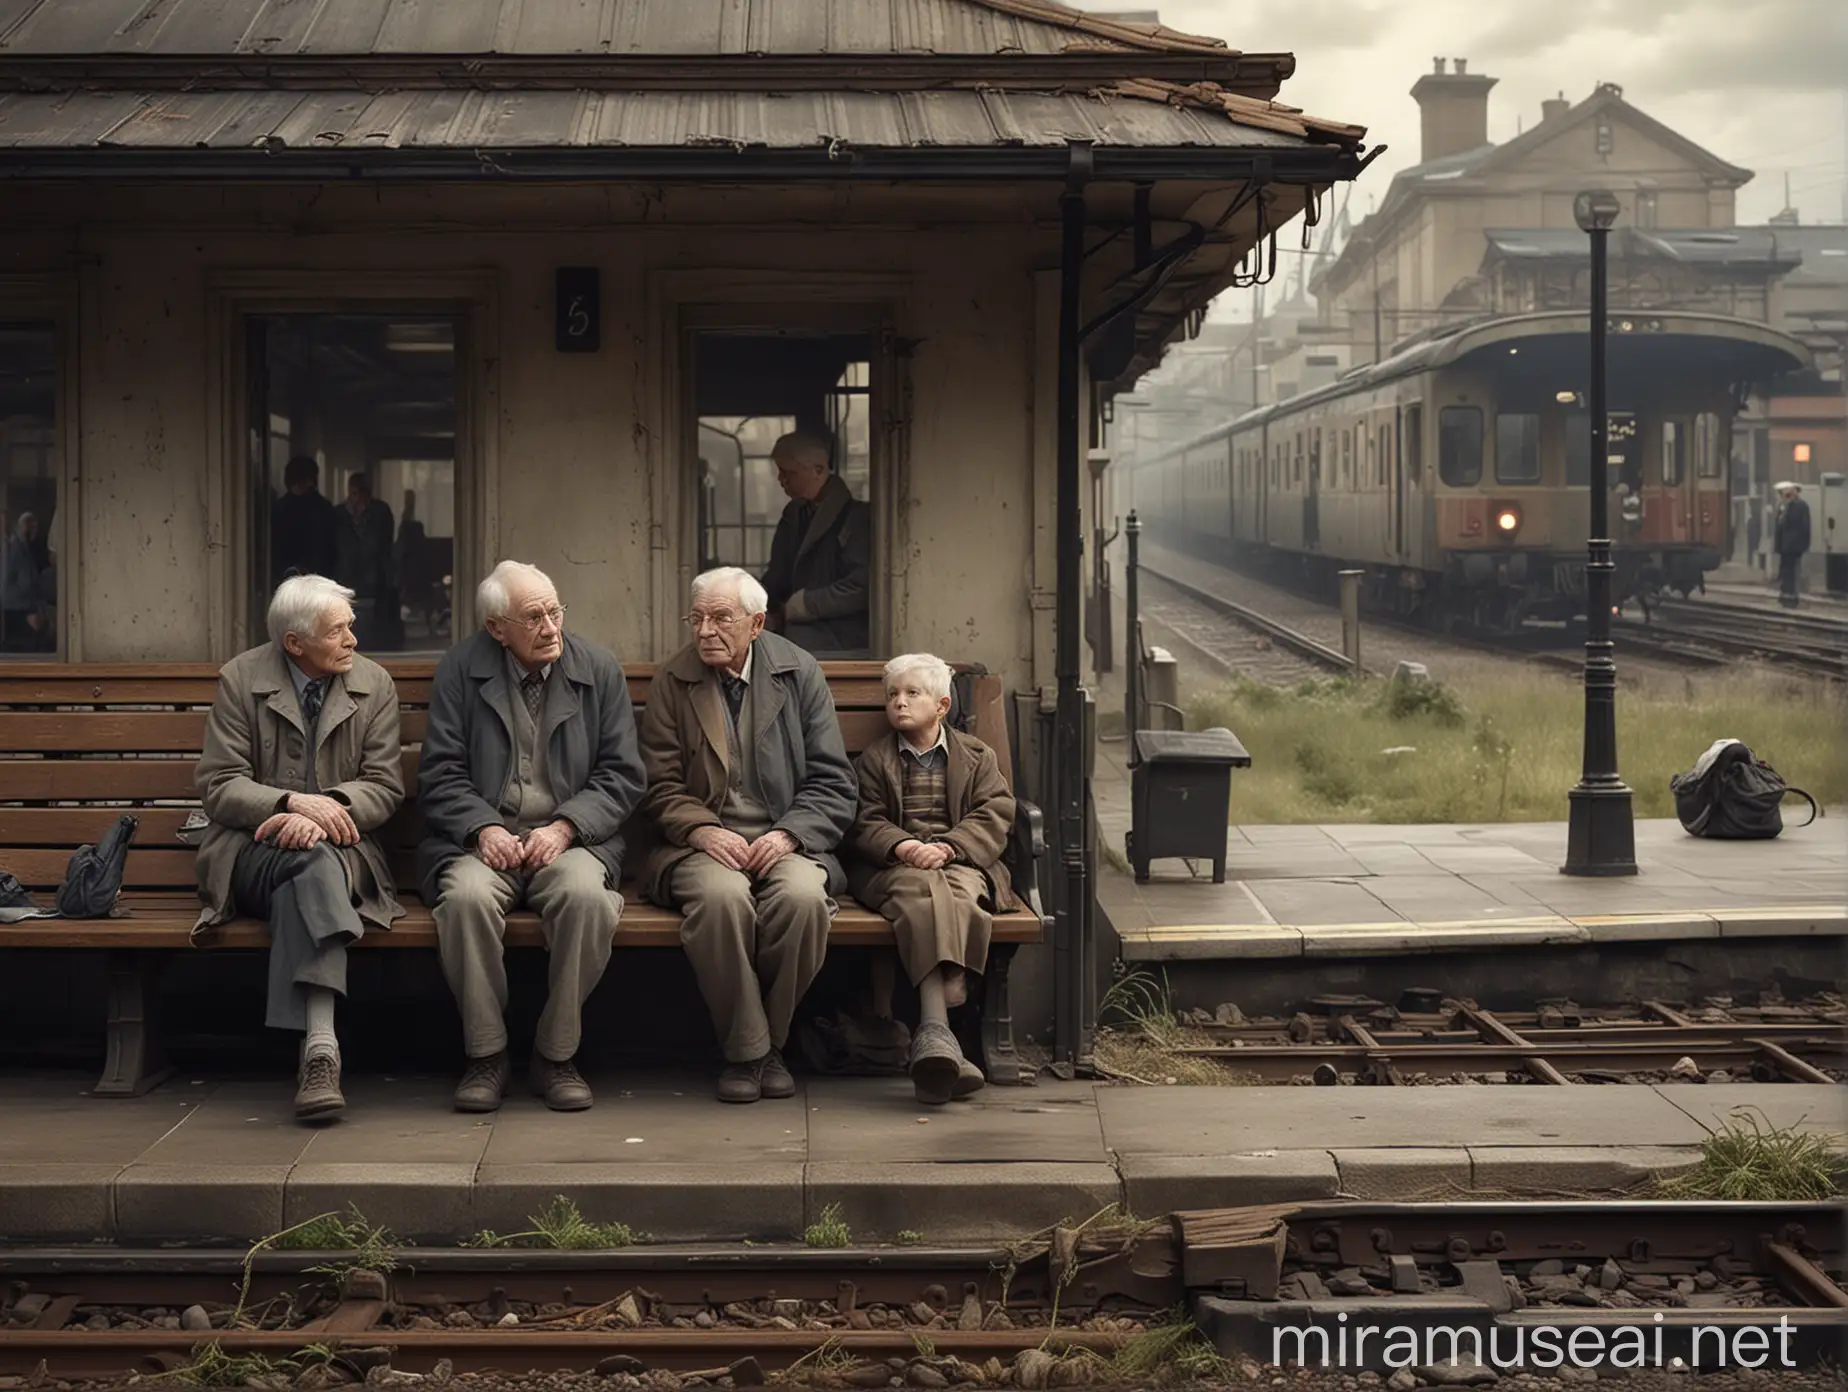 Life Journey at Train Station Boy Adult and Elderly Figures Waiting